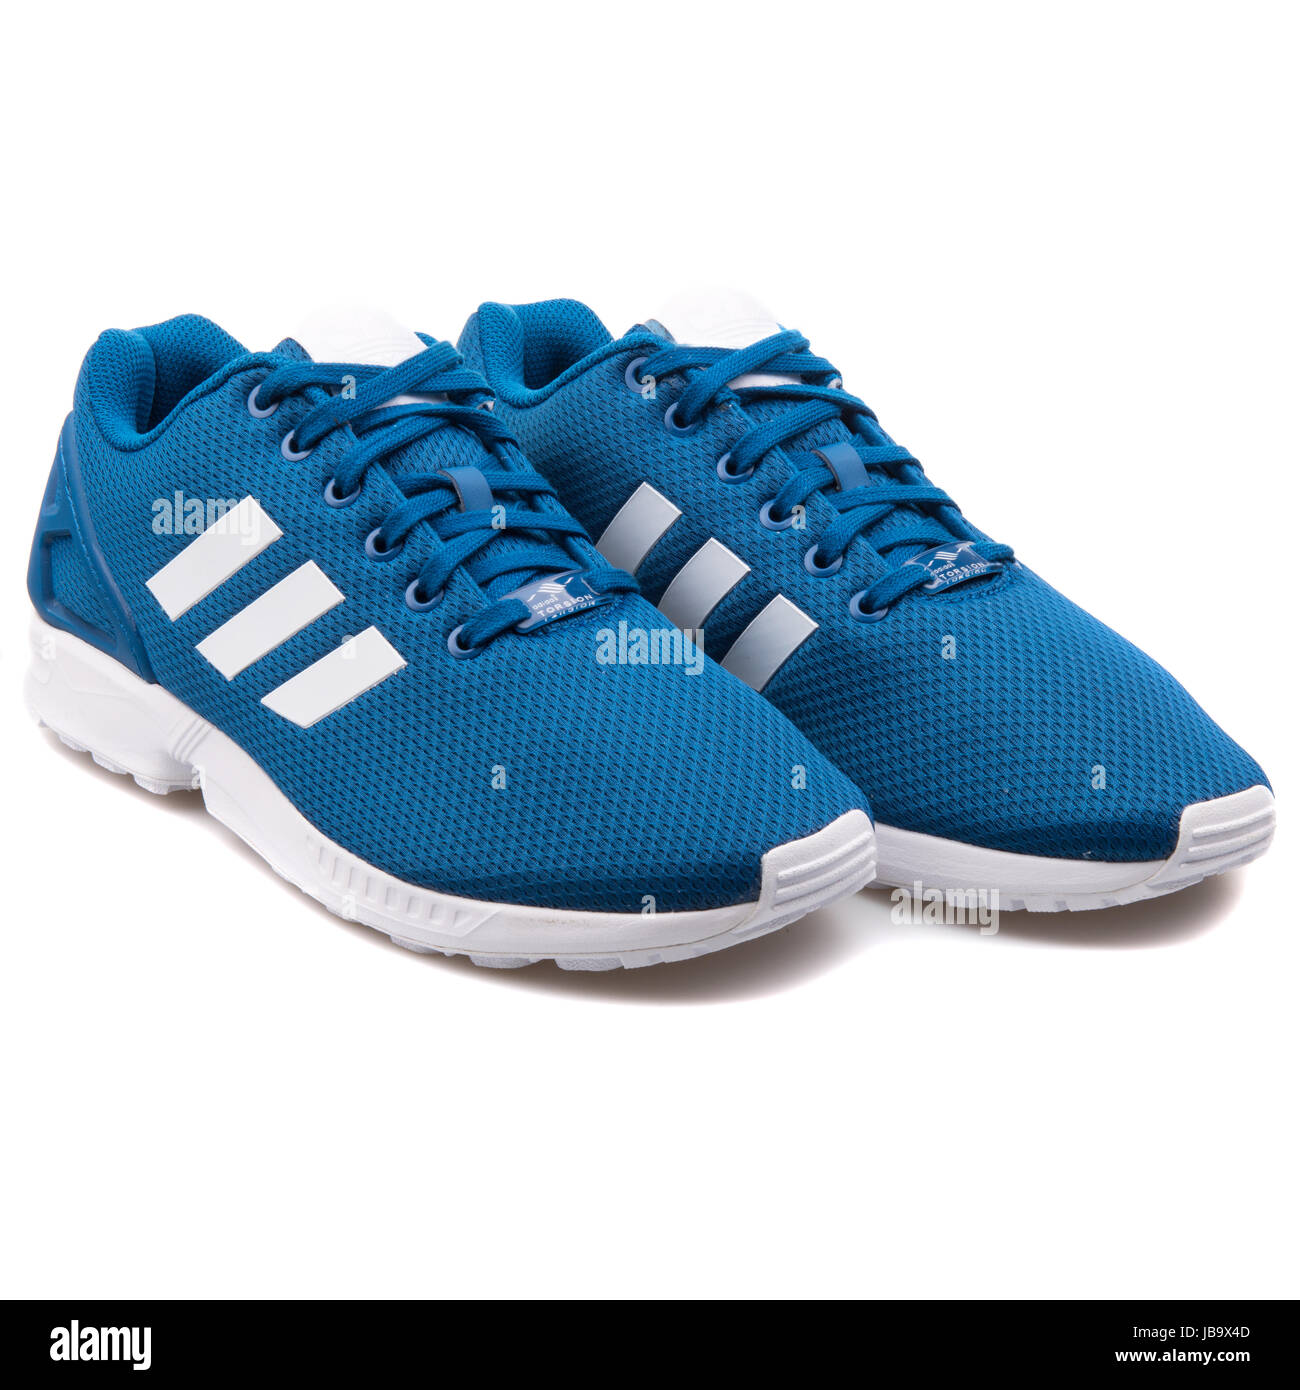 Adidas ZX Flux Blue Men's Running Shoes - AF6344 Stock Photo - Alamy